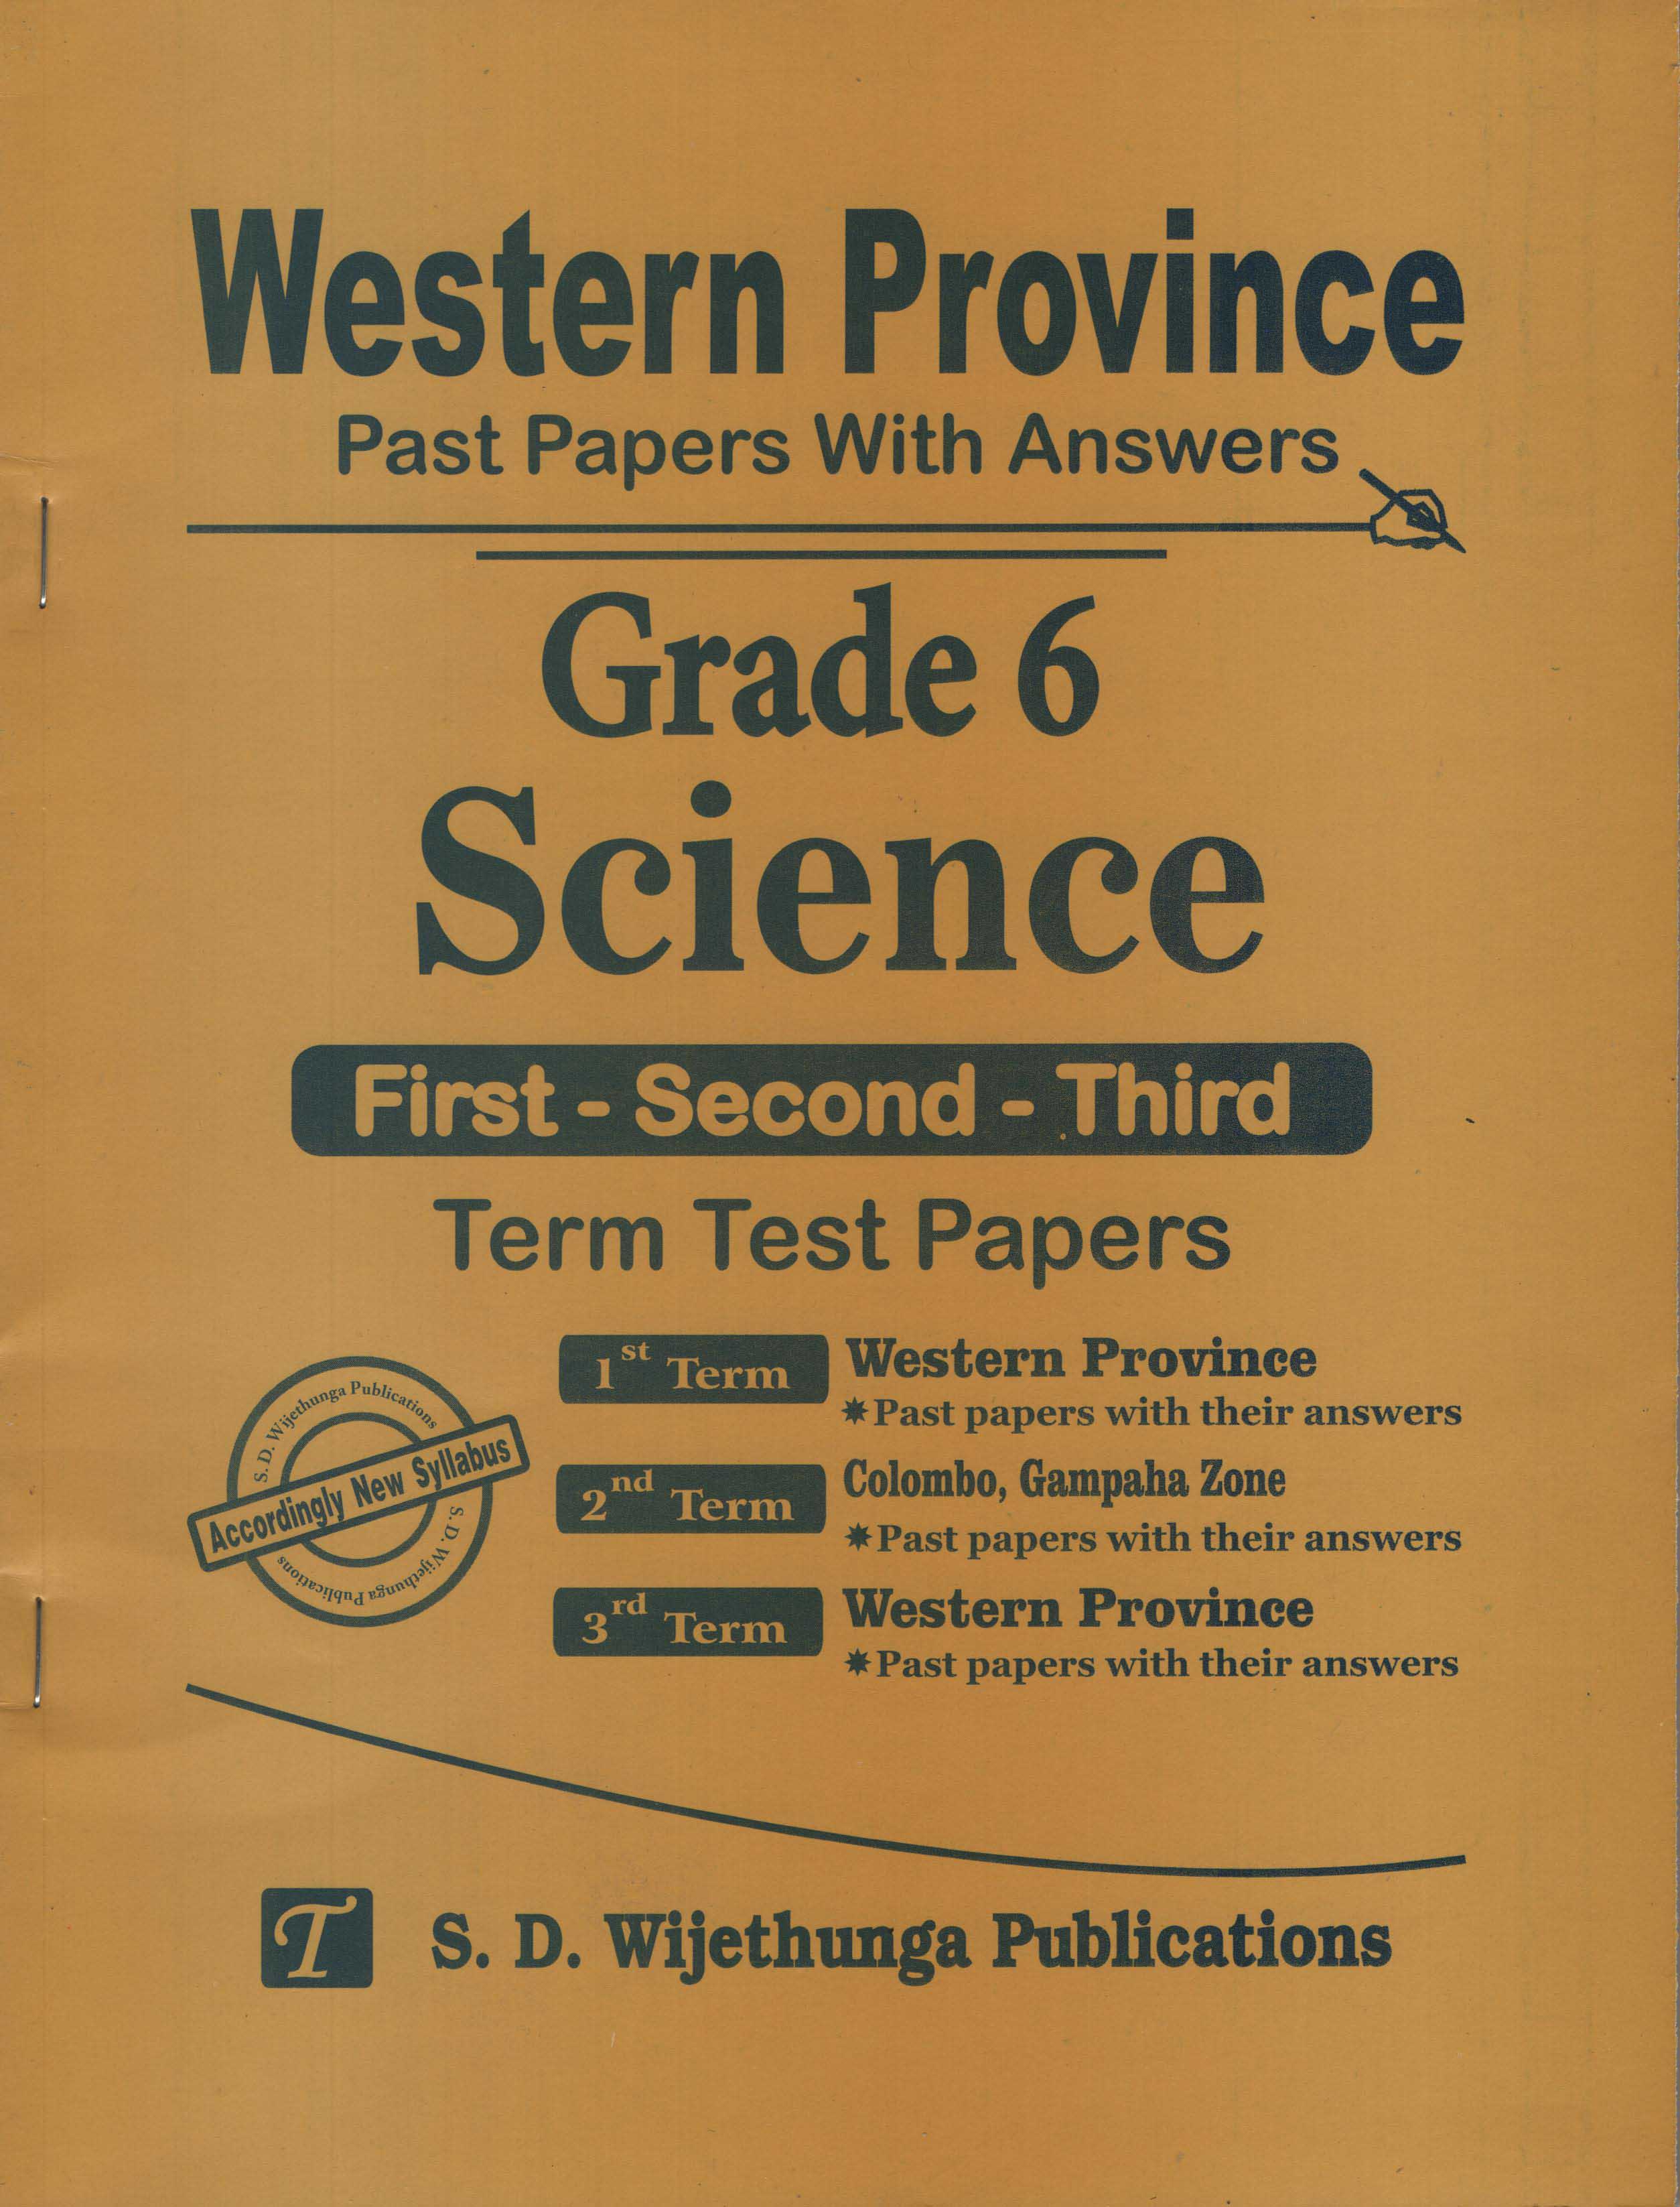 Western Province Past Papers with Answers Grade 06 Science (First-Second-Third) Term Test Papers